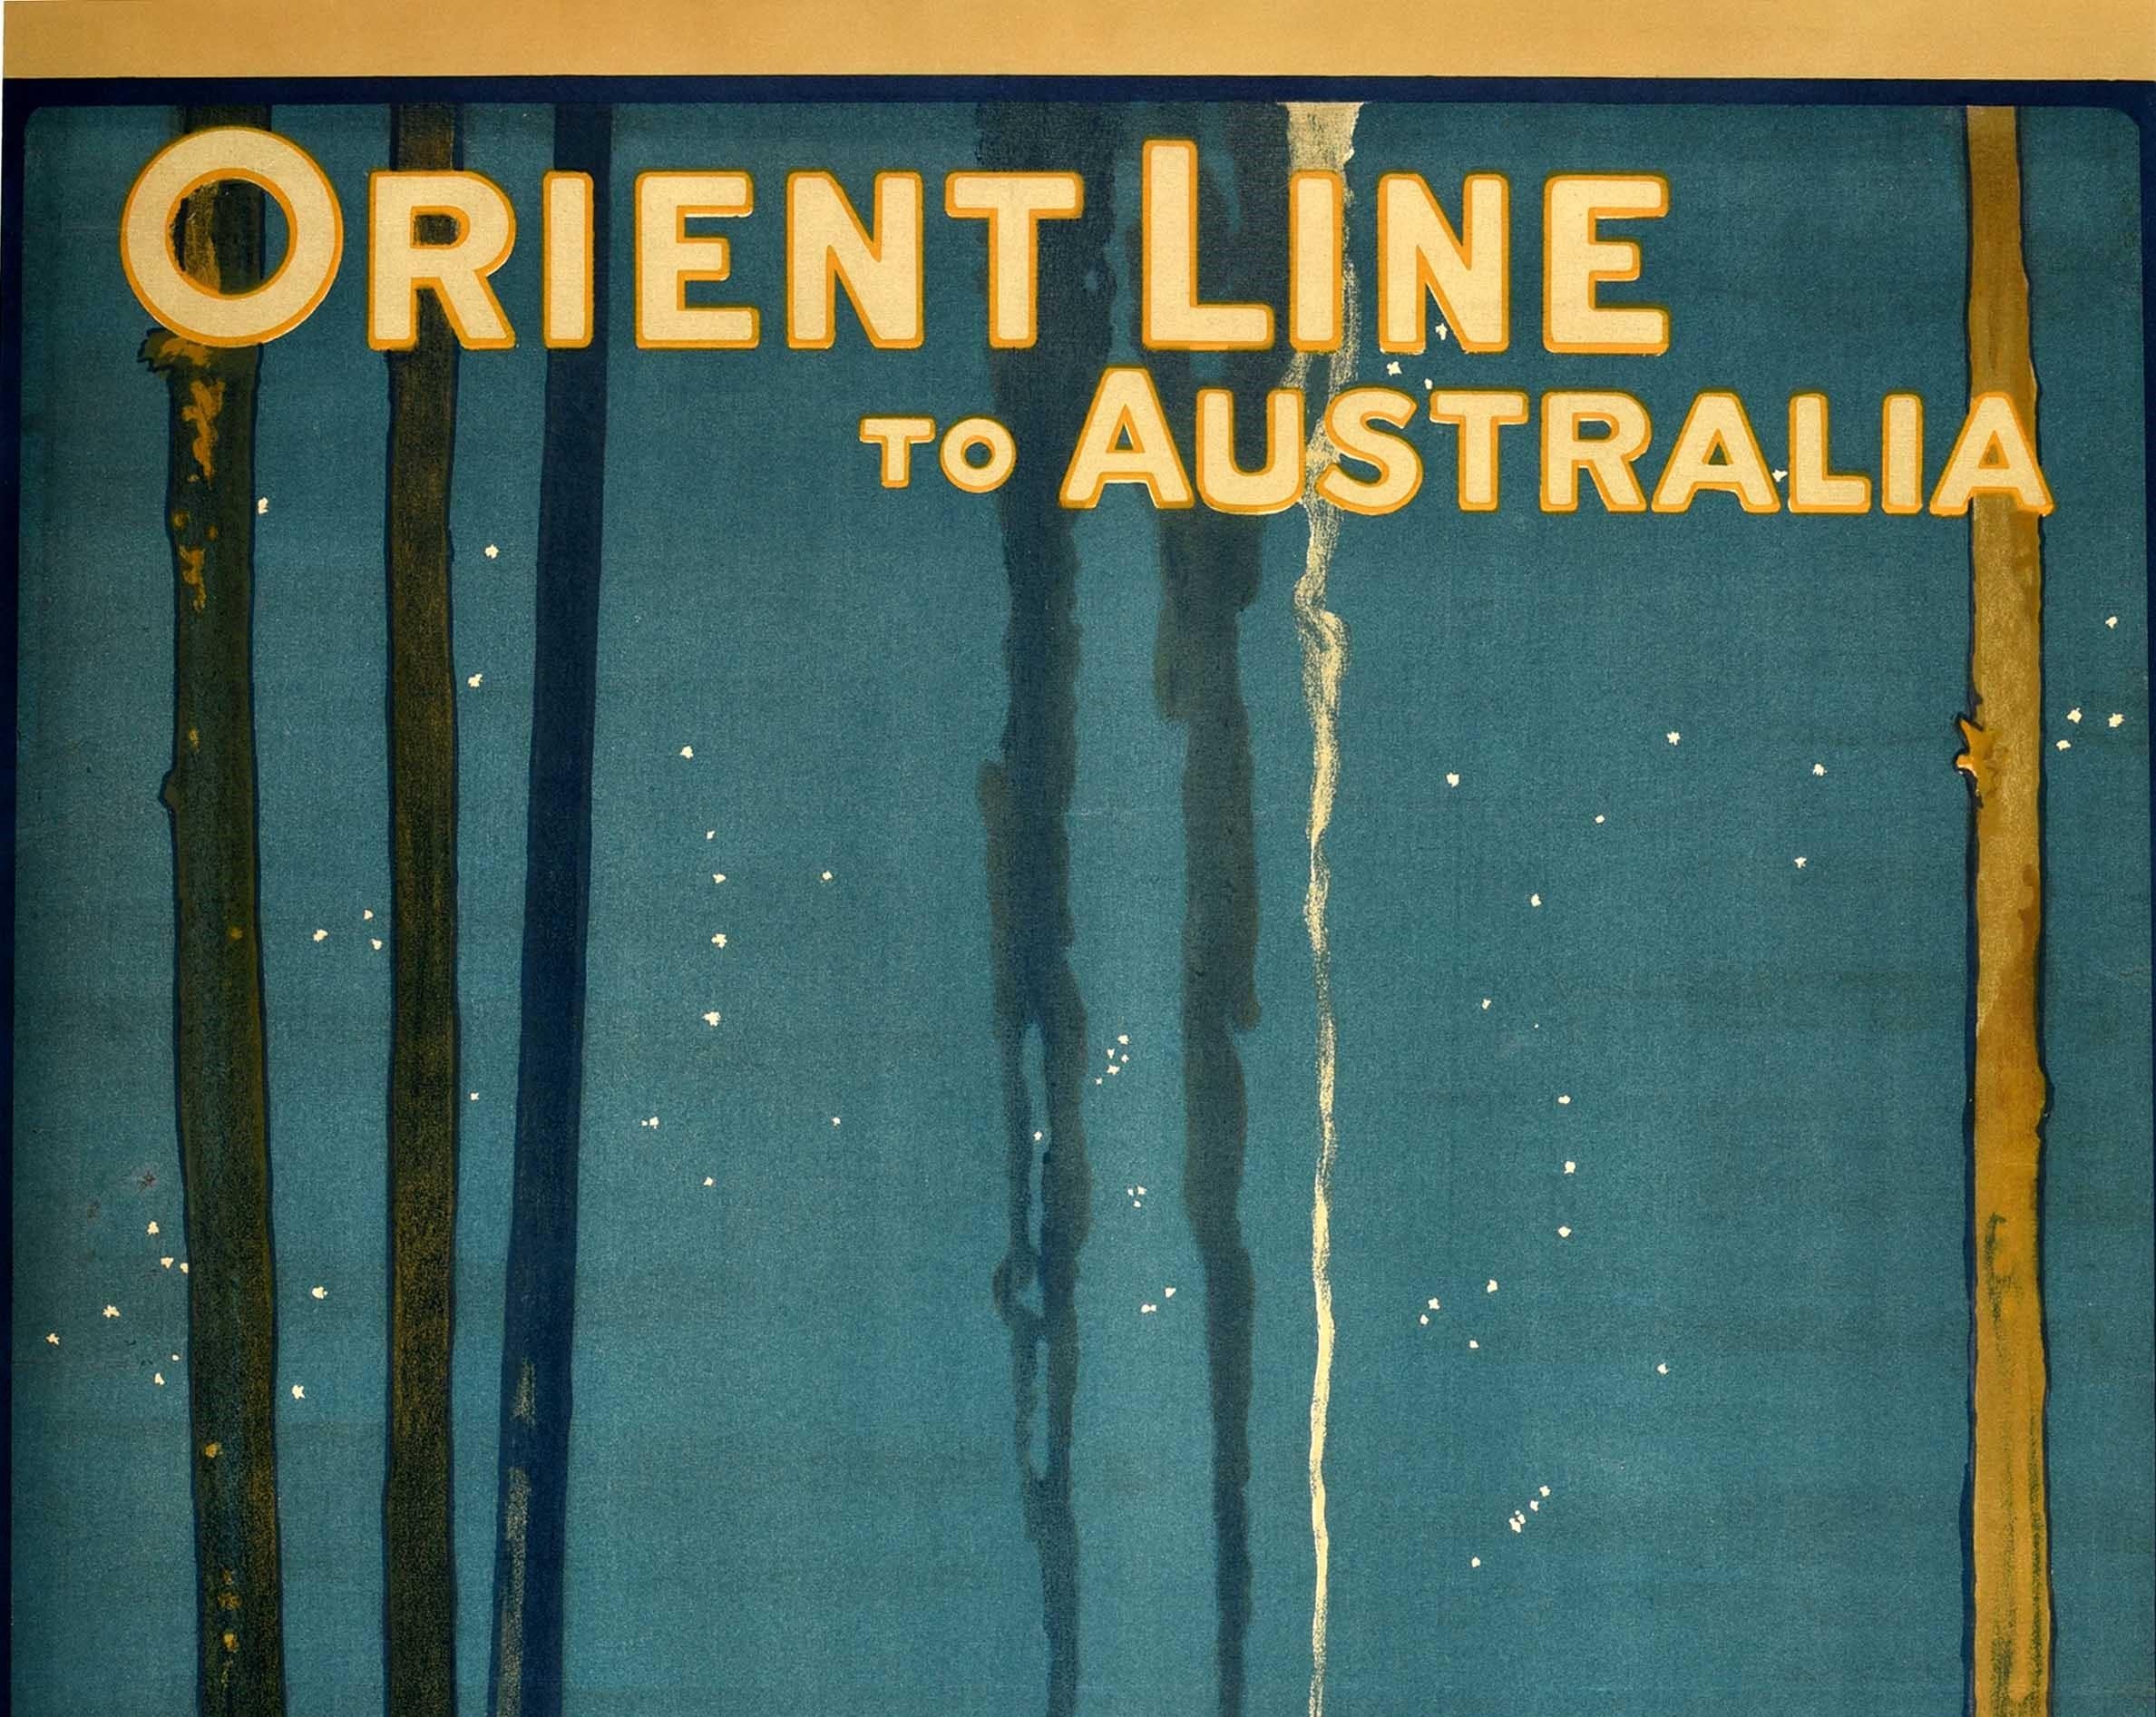 Original antique cruise travel poster for the Orient Line to Australia featuring stunning artwork by the British painter Elijah Albert Cox (1876-1955) depicting three people in colourful clothing and headscarves sitting around the fire at night and